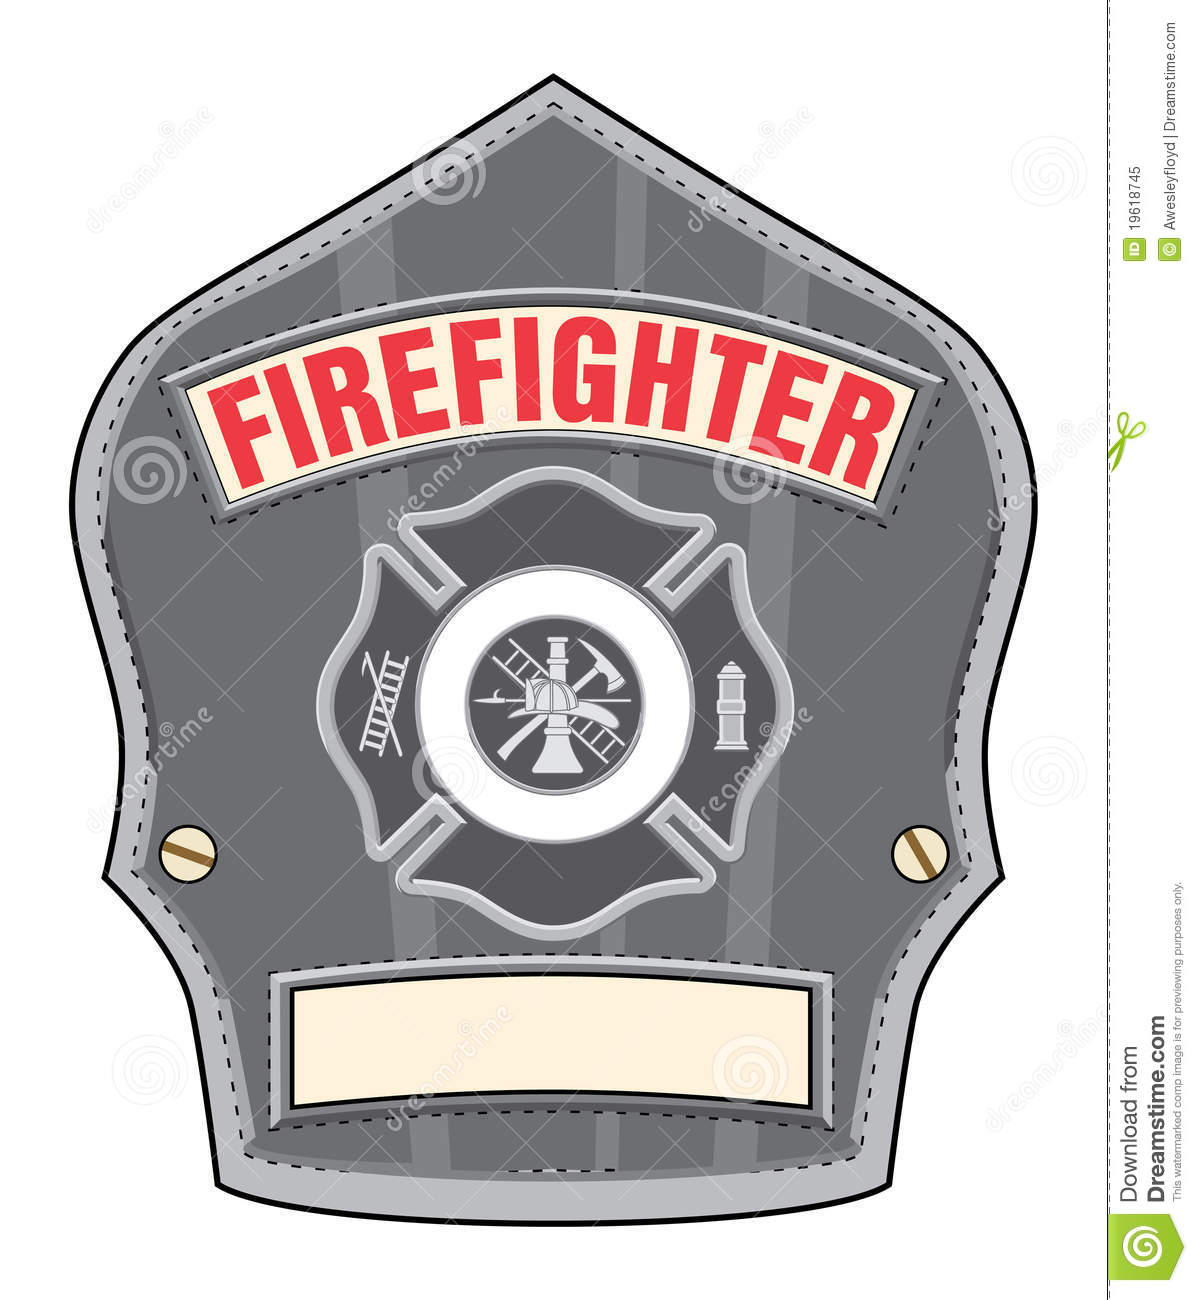 Firefighter Helmet Or Fireman Hat Badge With Cross And Firefighter